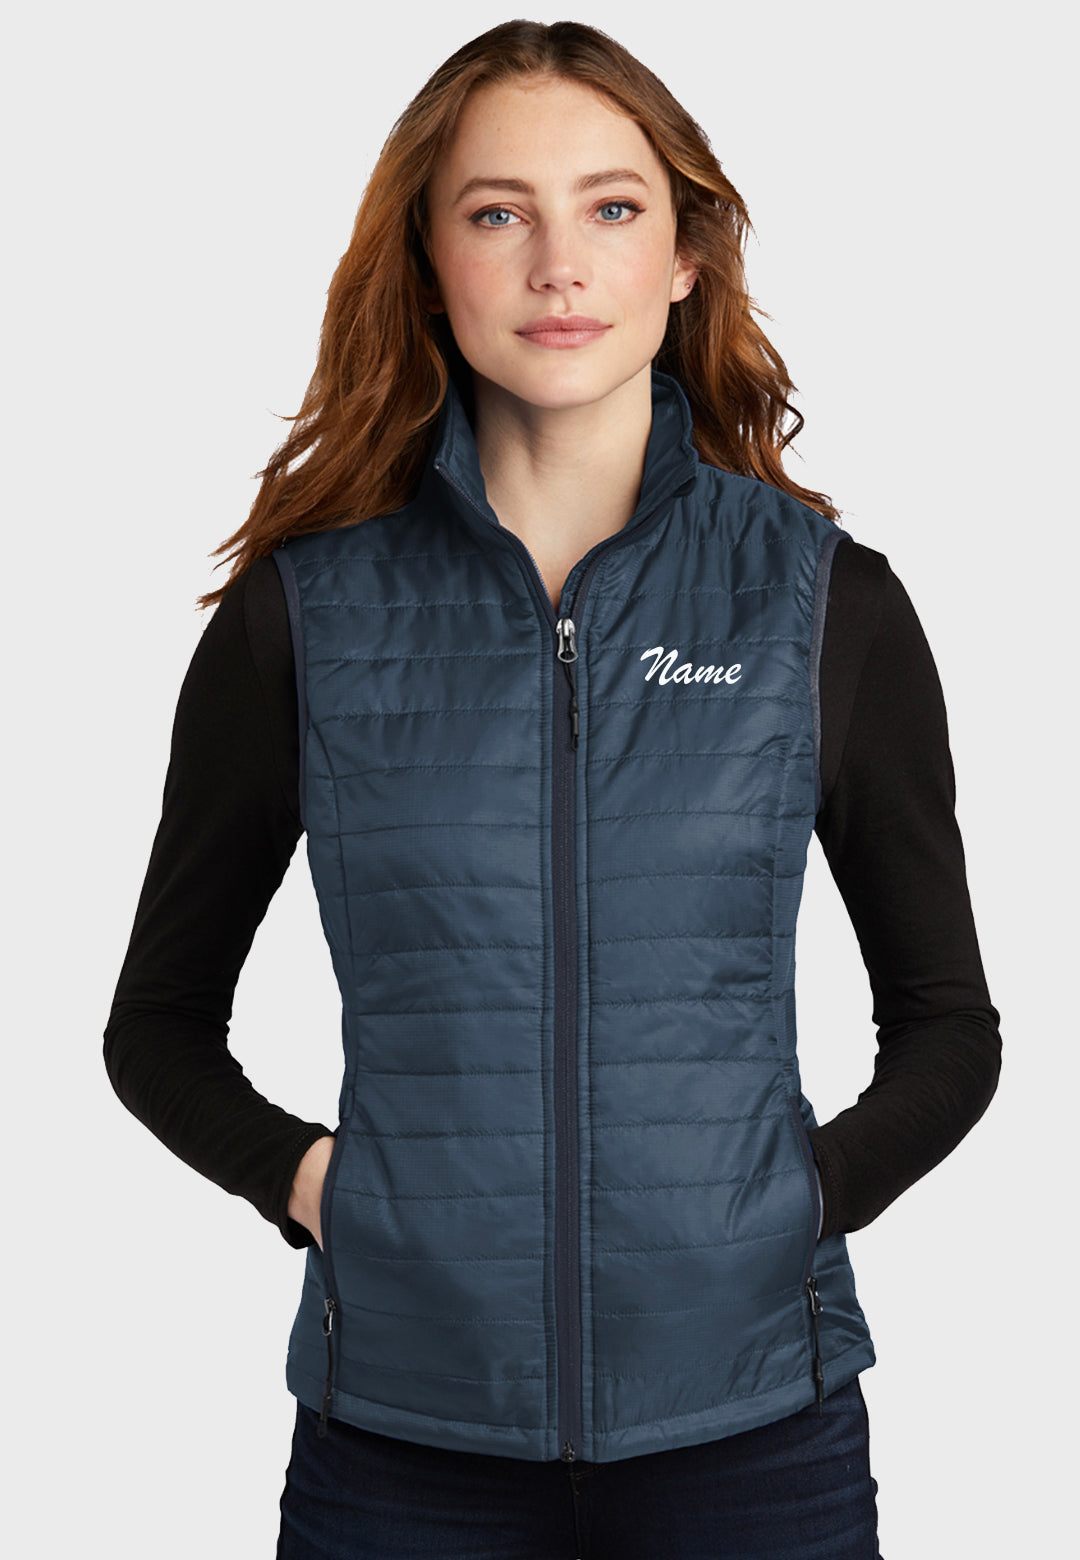 Burk Equestrian Port Authority® Packable Puffy Vest - Ladies + Mens Styles